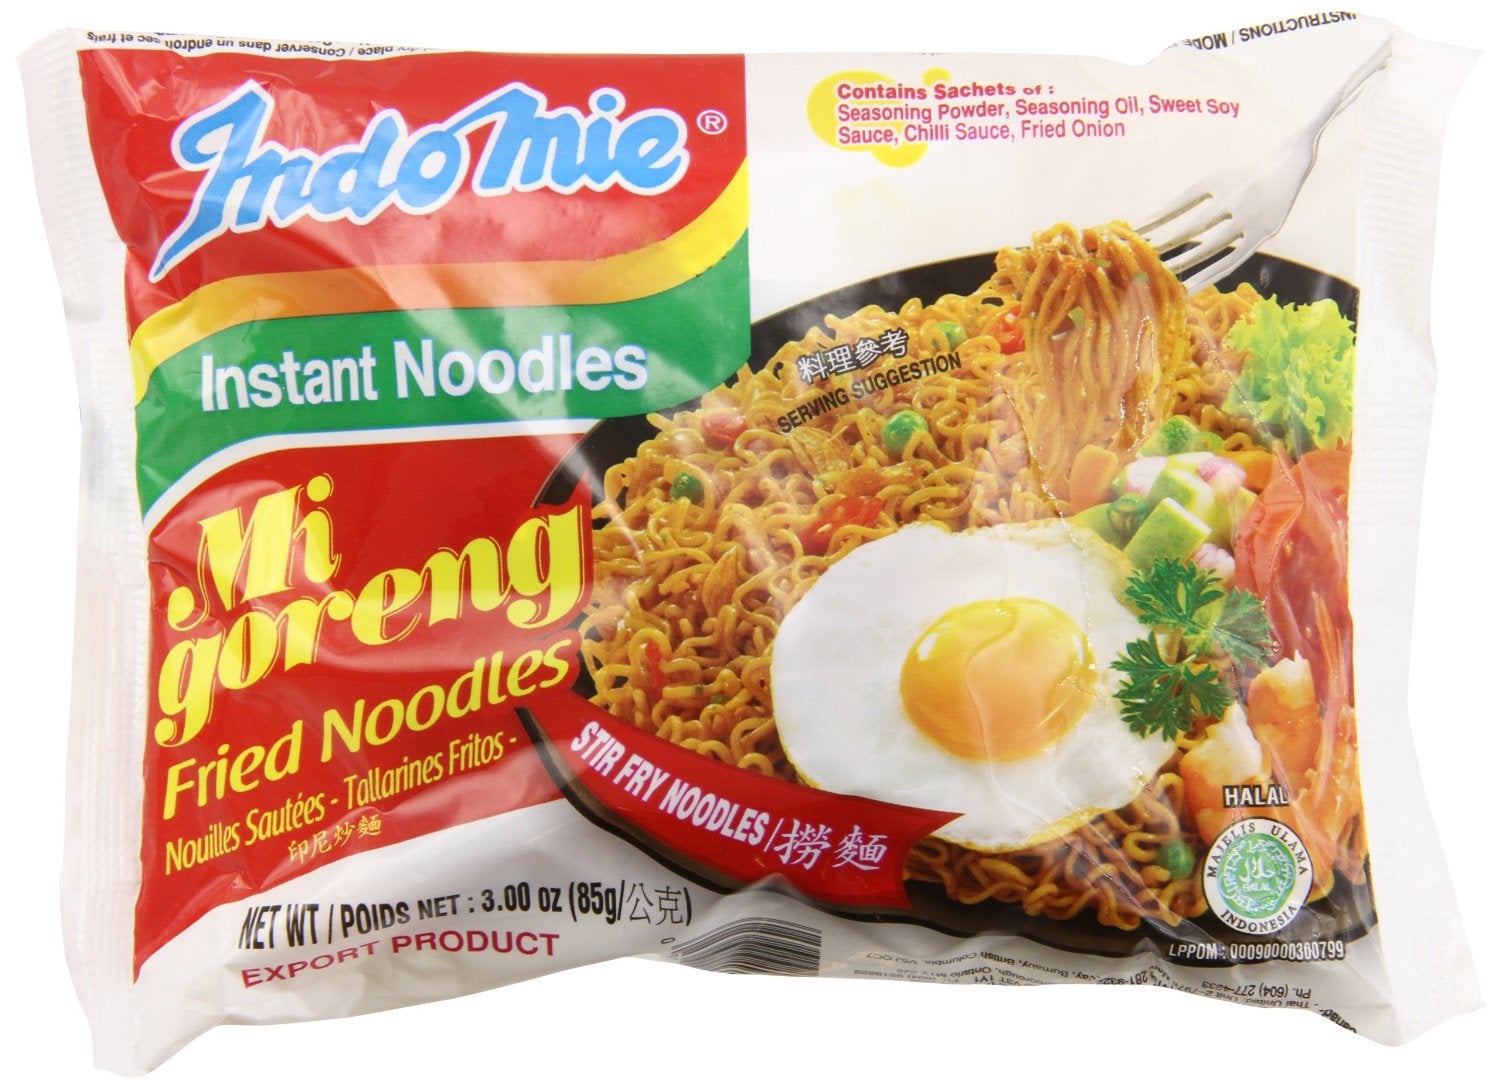 All Time Malaysian Favorite Indomee Rack Up 5 Star Review On Amazon - World Of Buzz